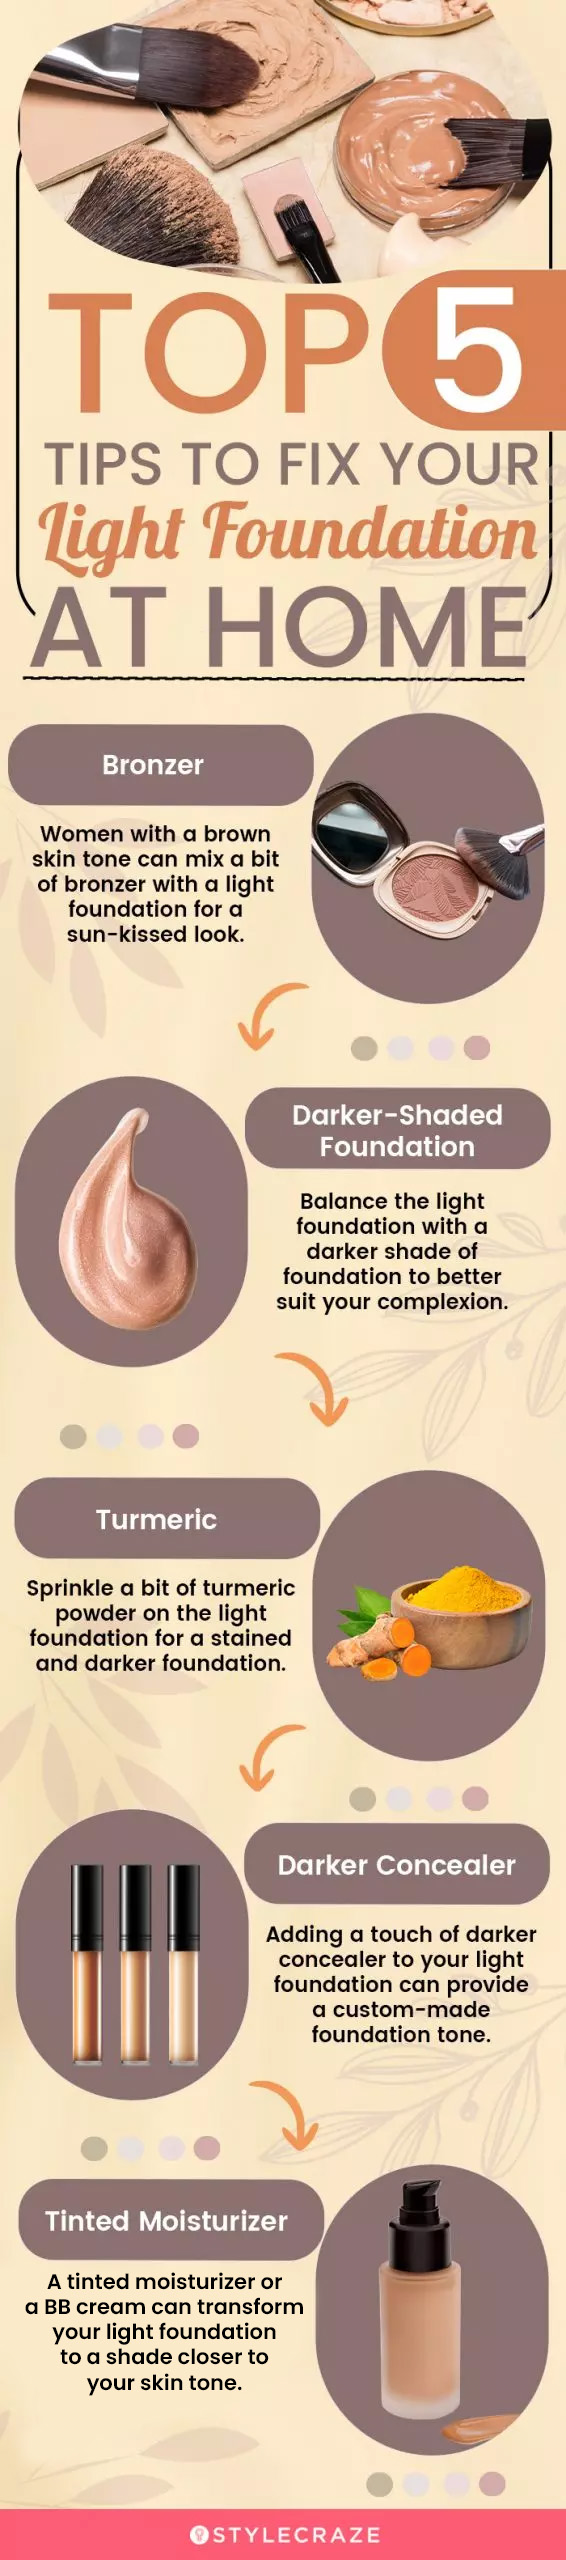 top 5 tips to fix your light foundation at home (infographic)